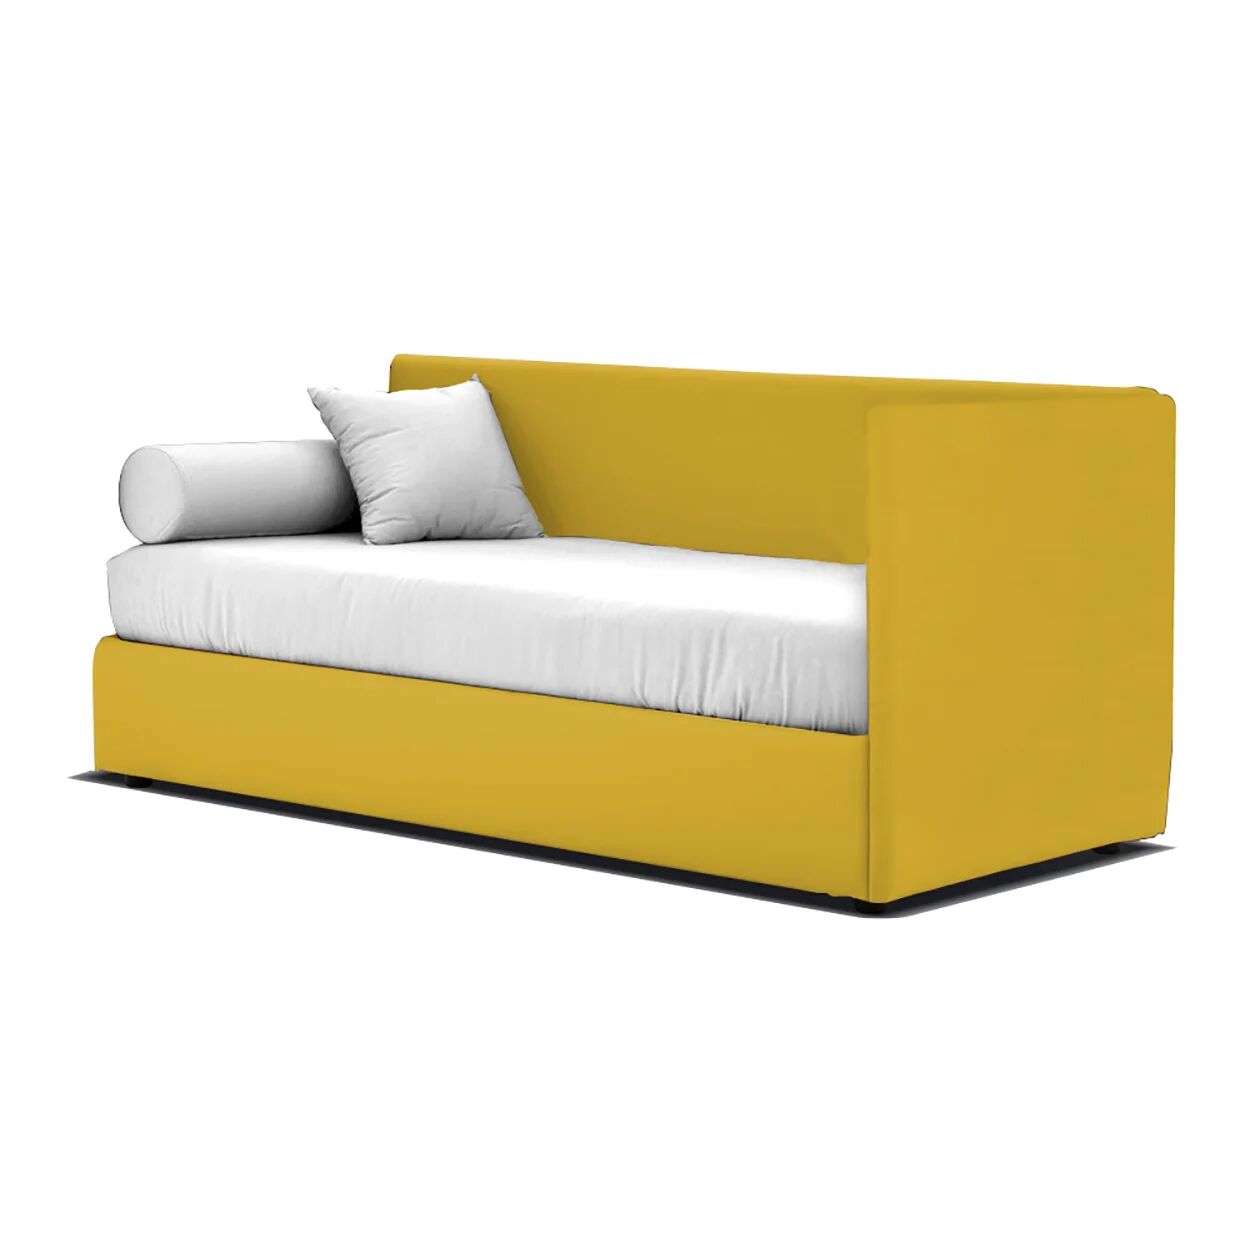 Let it Bed WHY-D-LINEAR-DX - Letto versione box, giallo